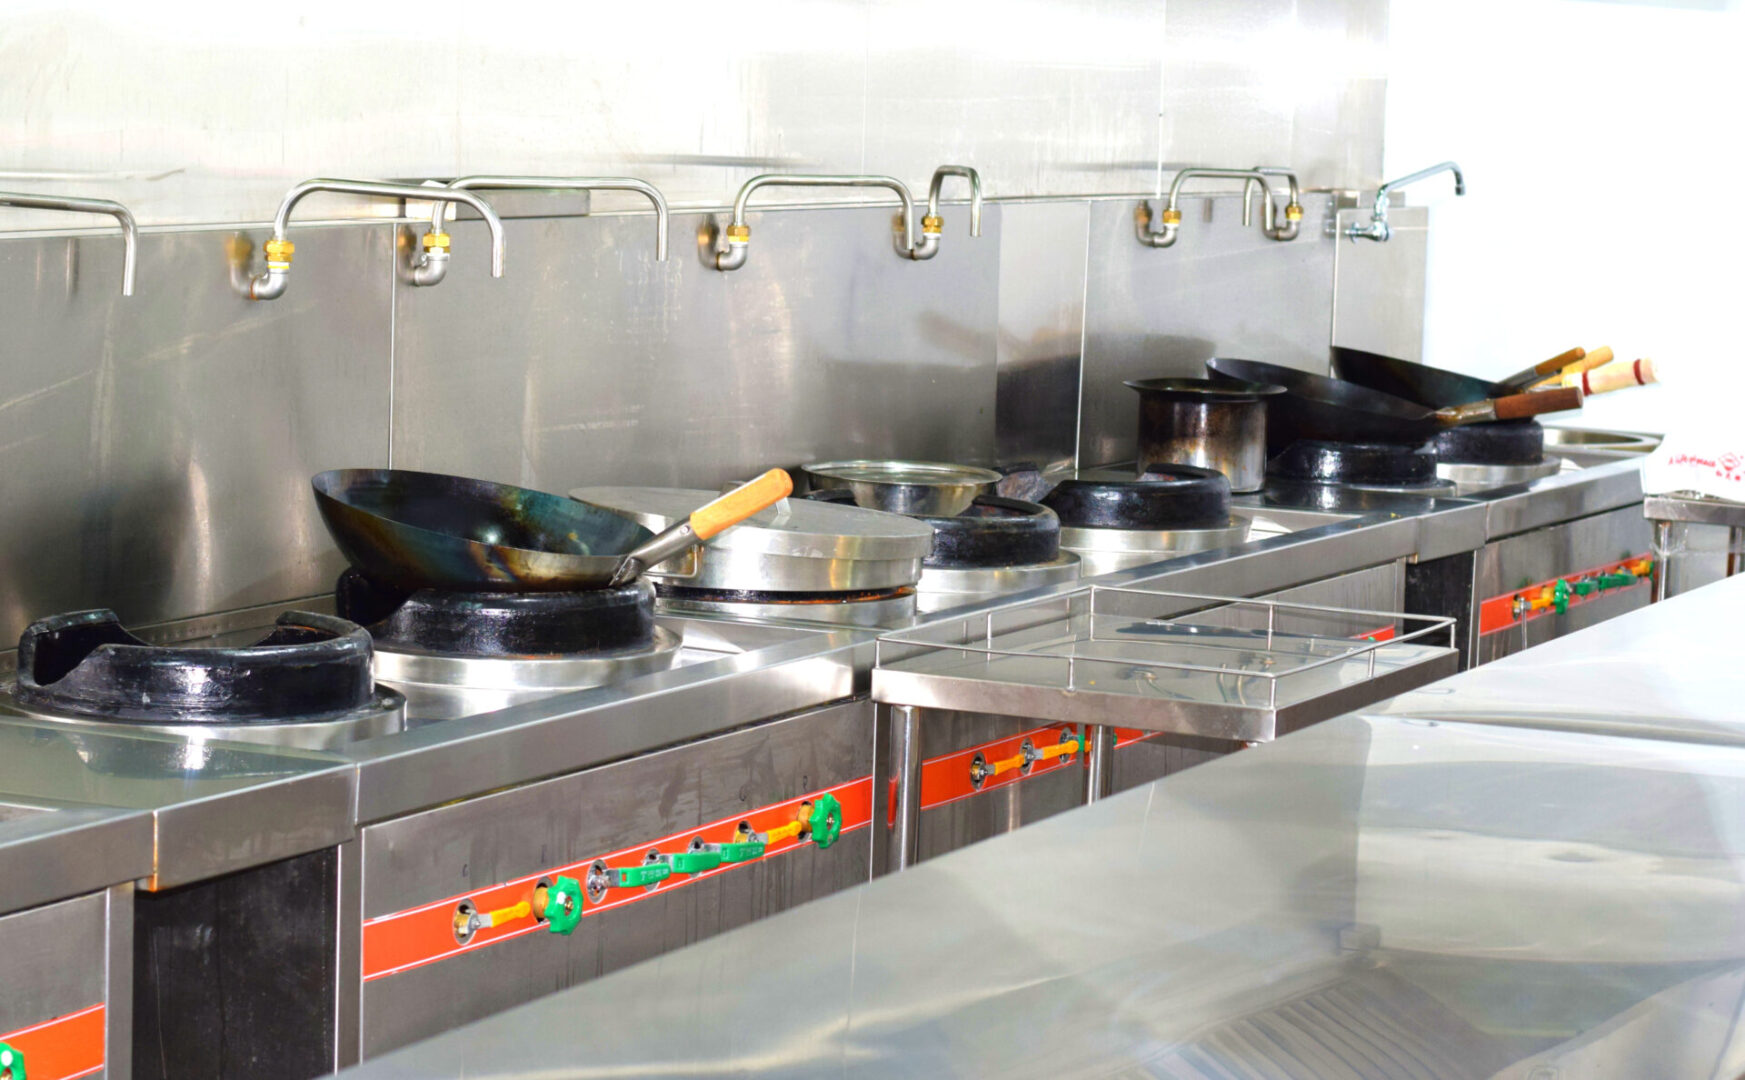 A row of pots and pans in an industrial kitchen.